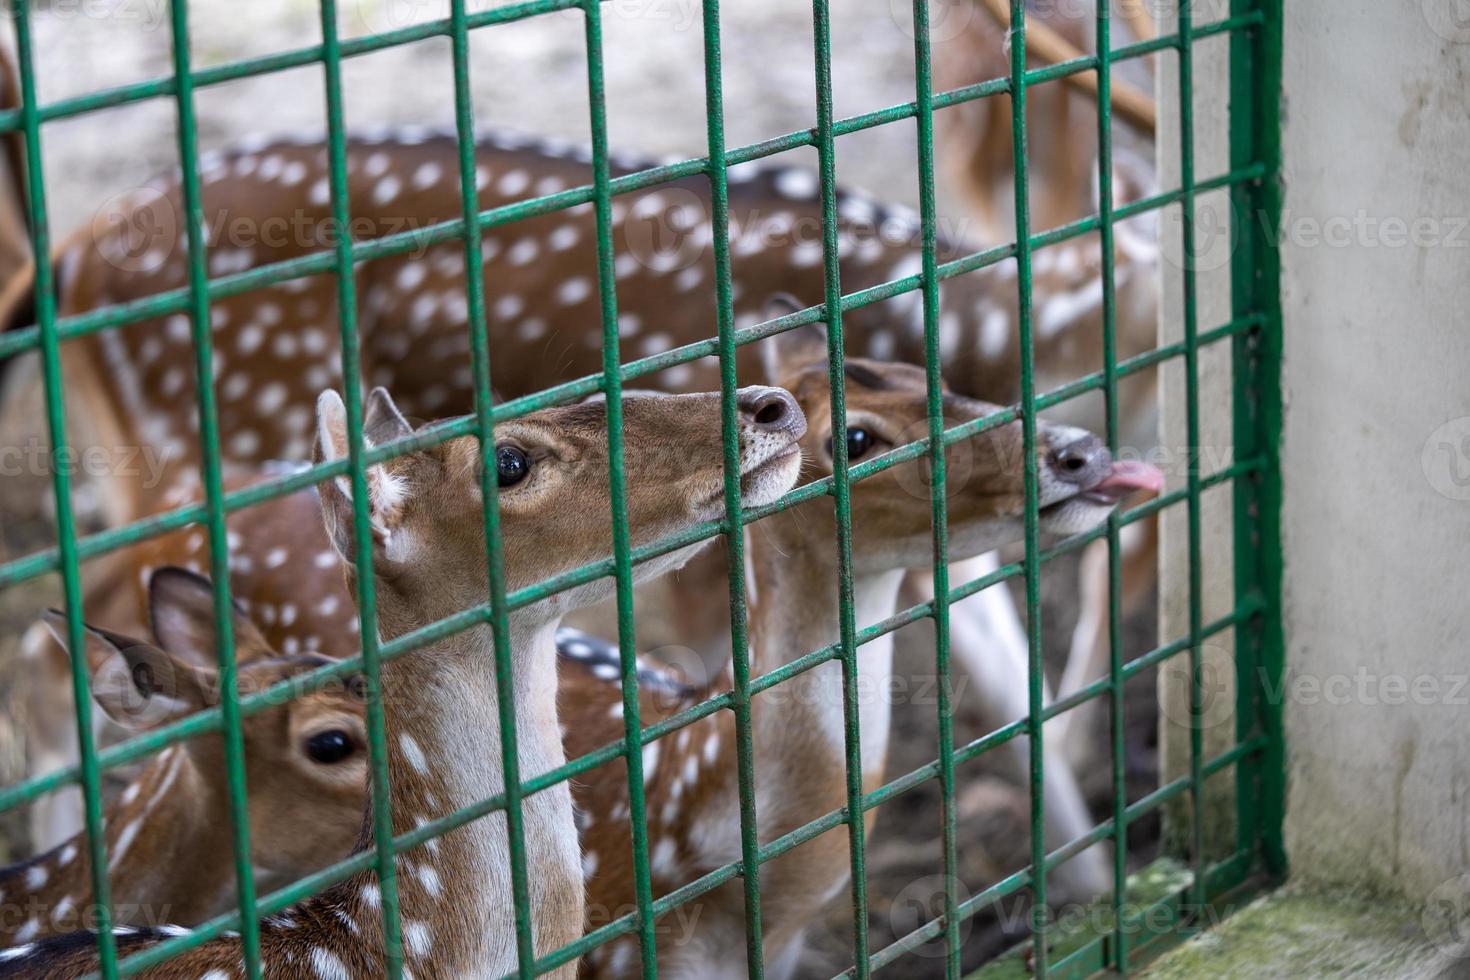 Deer from inside the cage looking at the camera photo